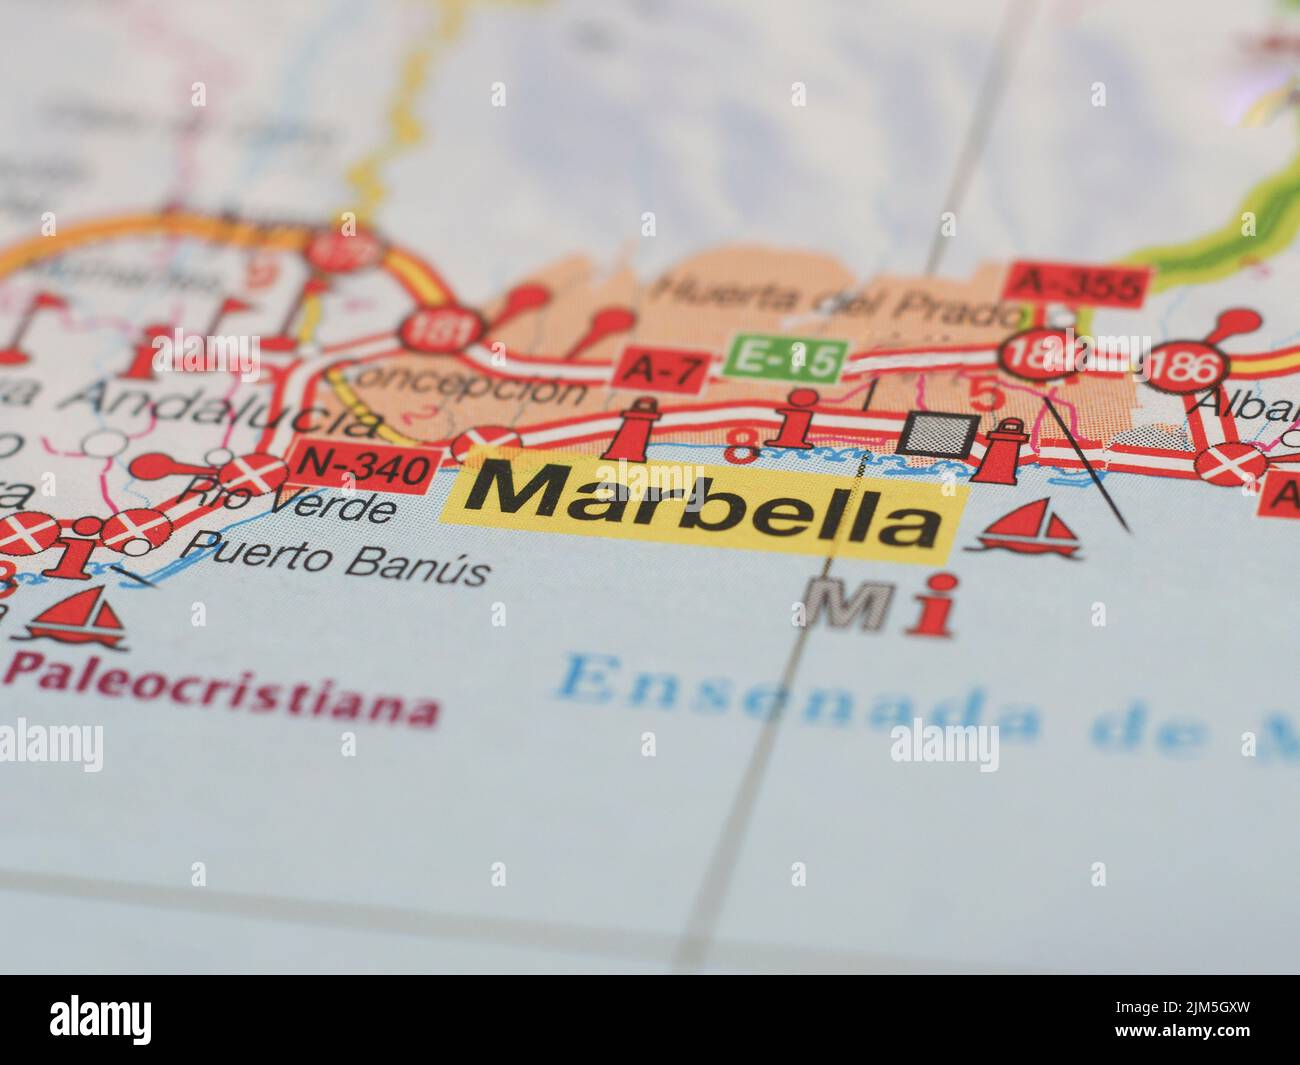 A Map With The Focus On The City Of Marbella Holiday Concept 2JM5GXW 